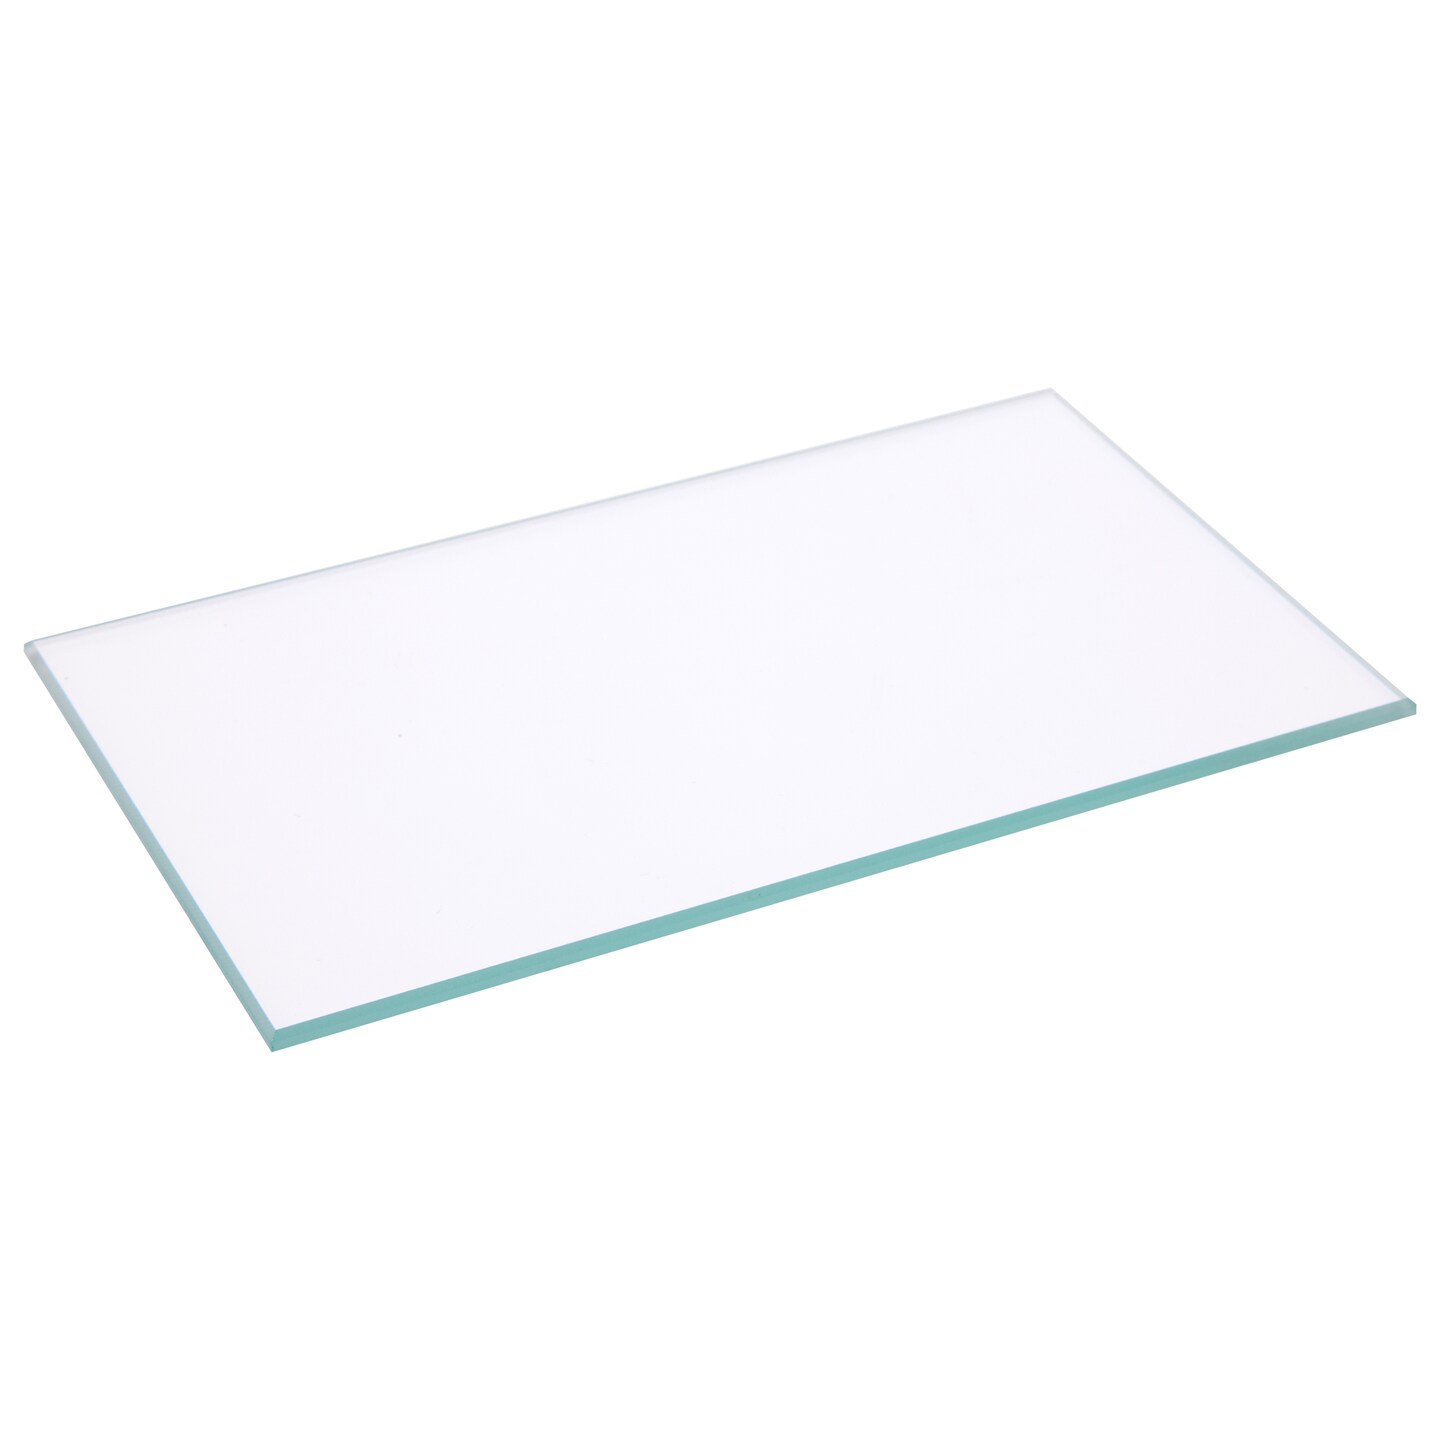 Plymor Rectangle 3mm Non-Beveled Clear Glass, 3 inch x 5 inch